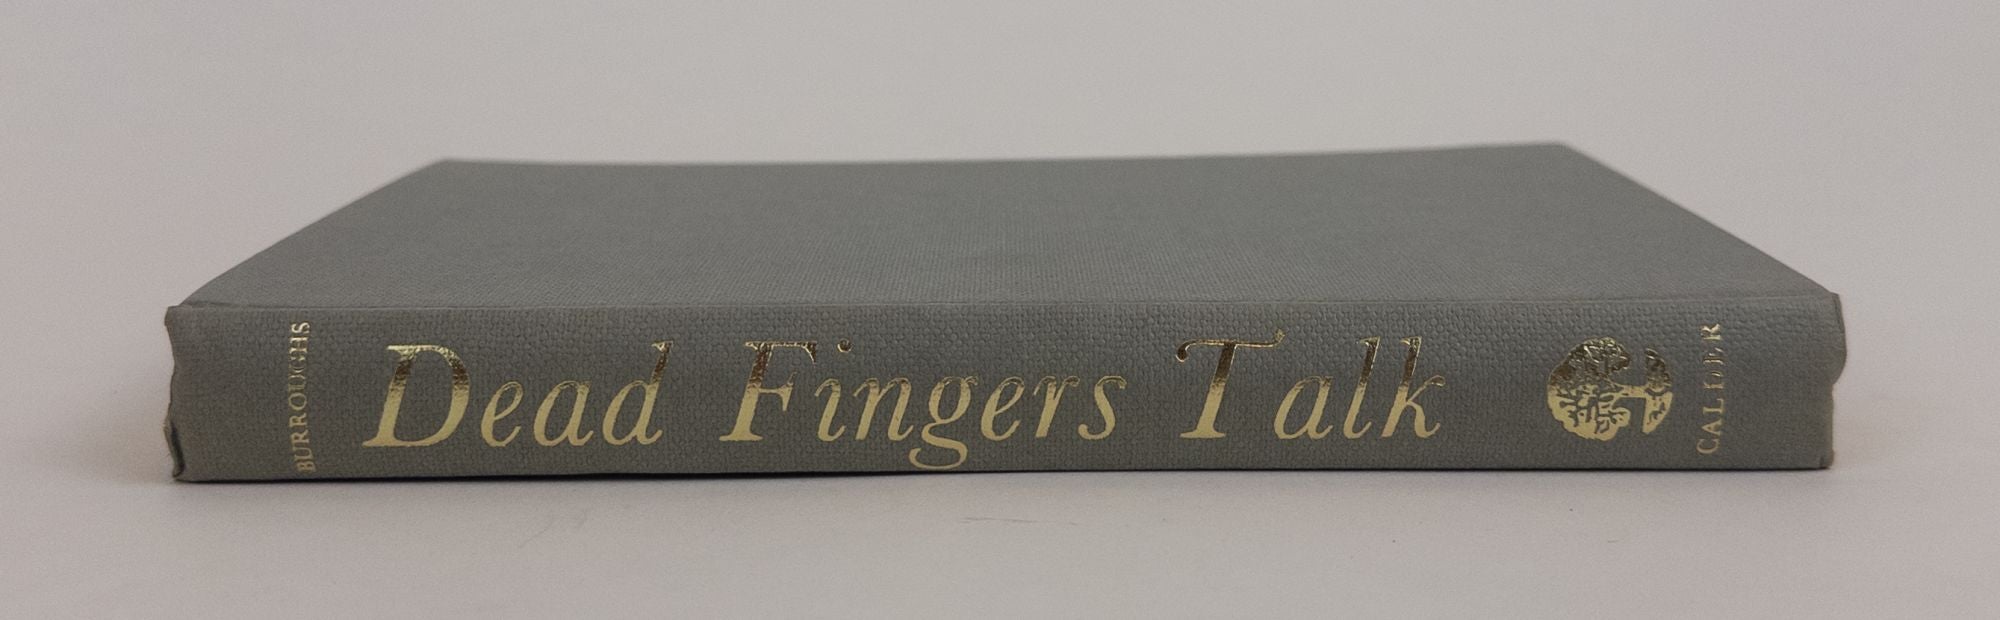 Product Image for DEAD FINGERS TALK [Signed]